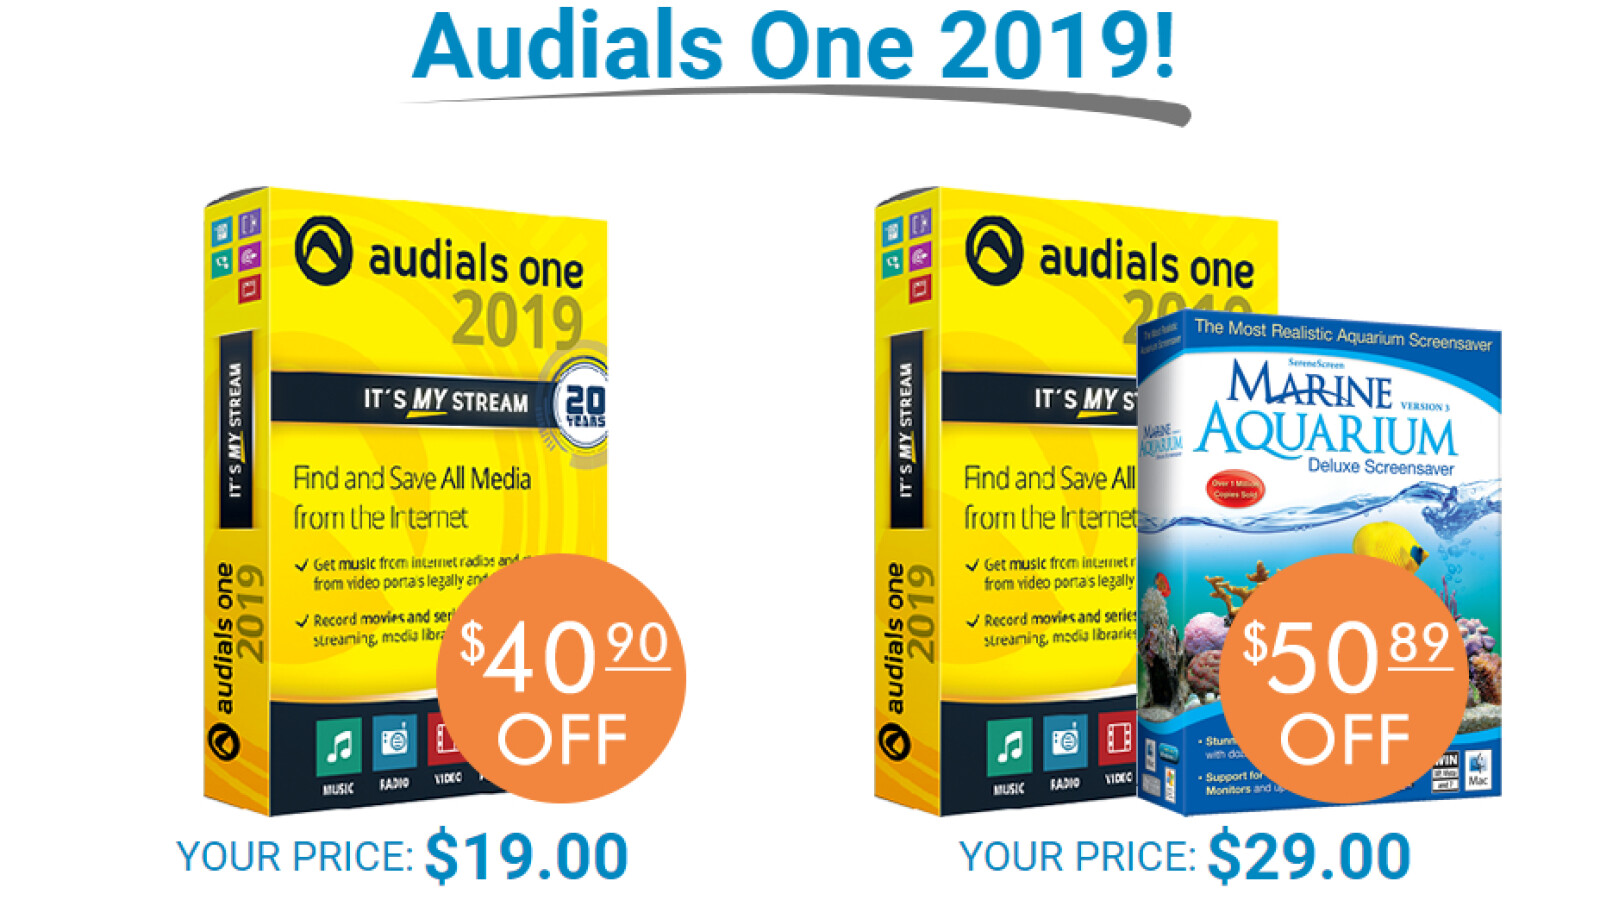 audials one 2019 sale